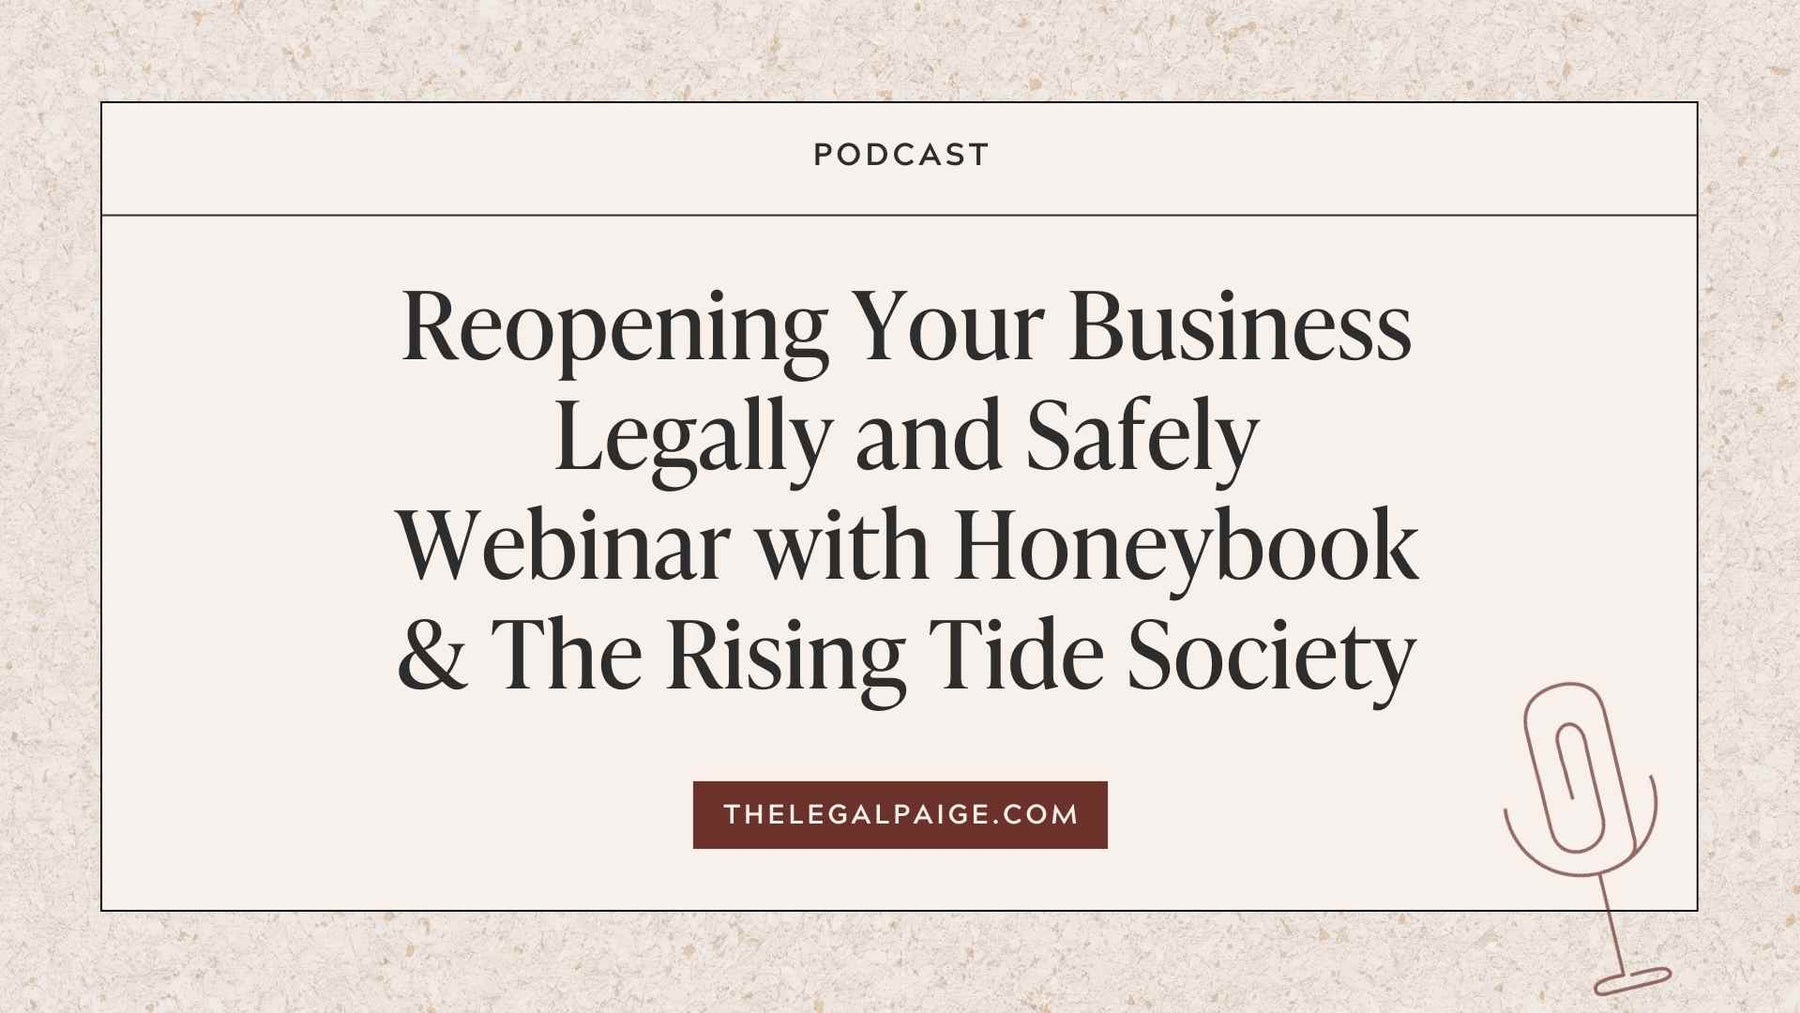 Episode 60: Reopening Your Business Legally and Safely Webinar with Honeybook & The Rising Tide Society